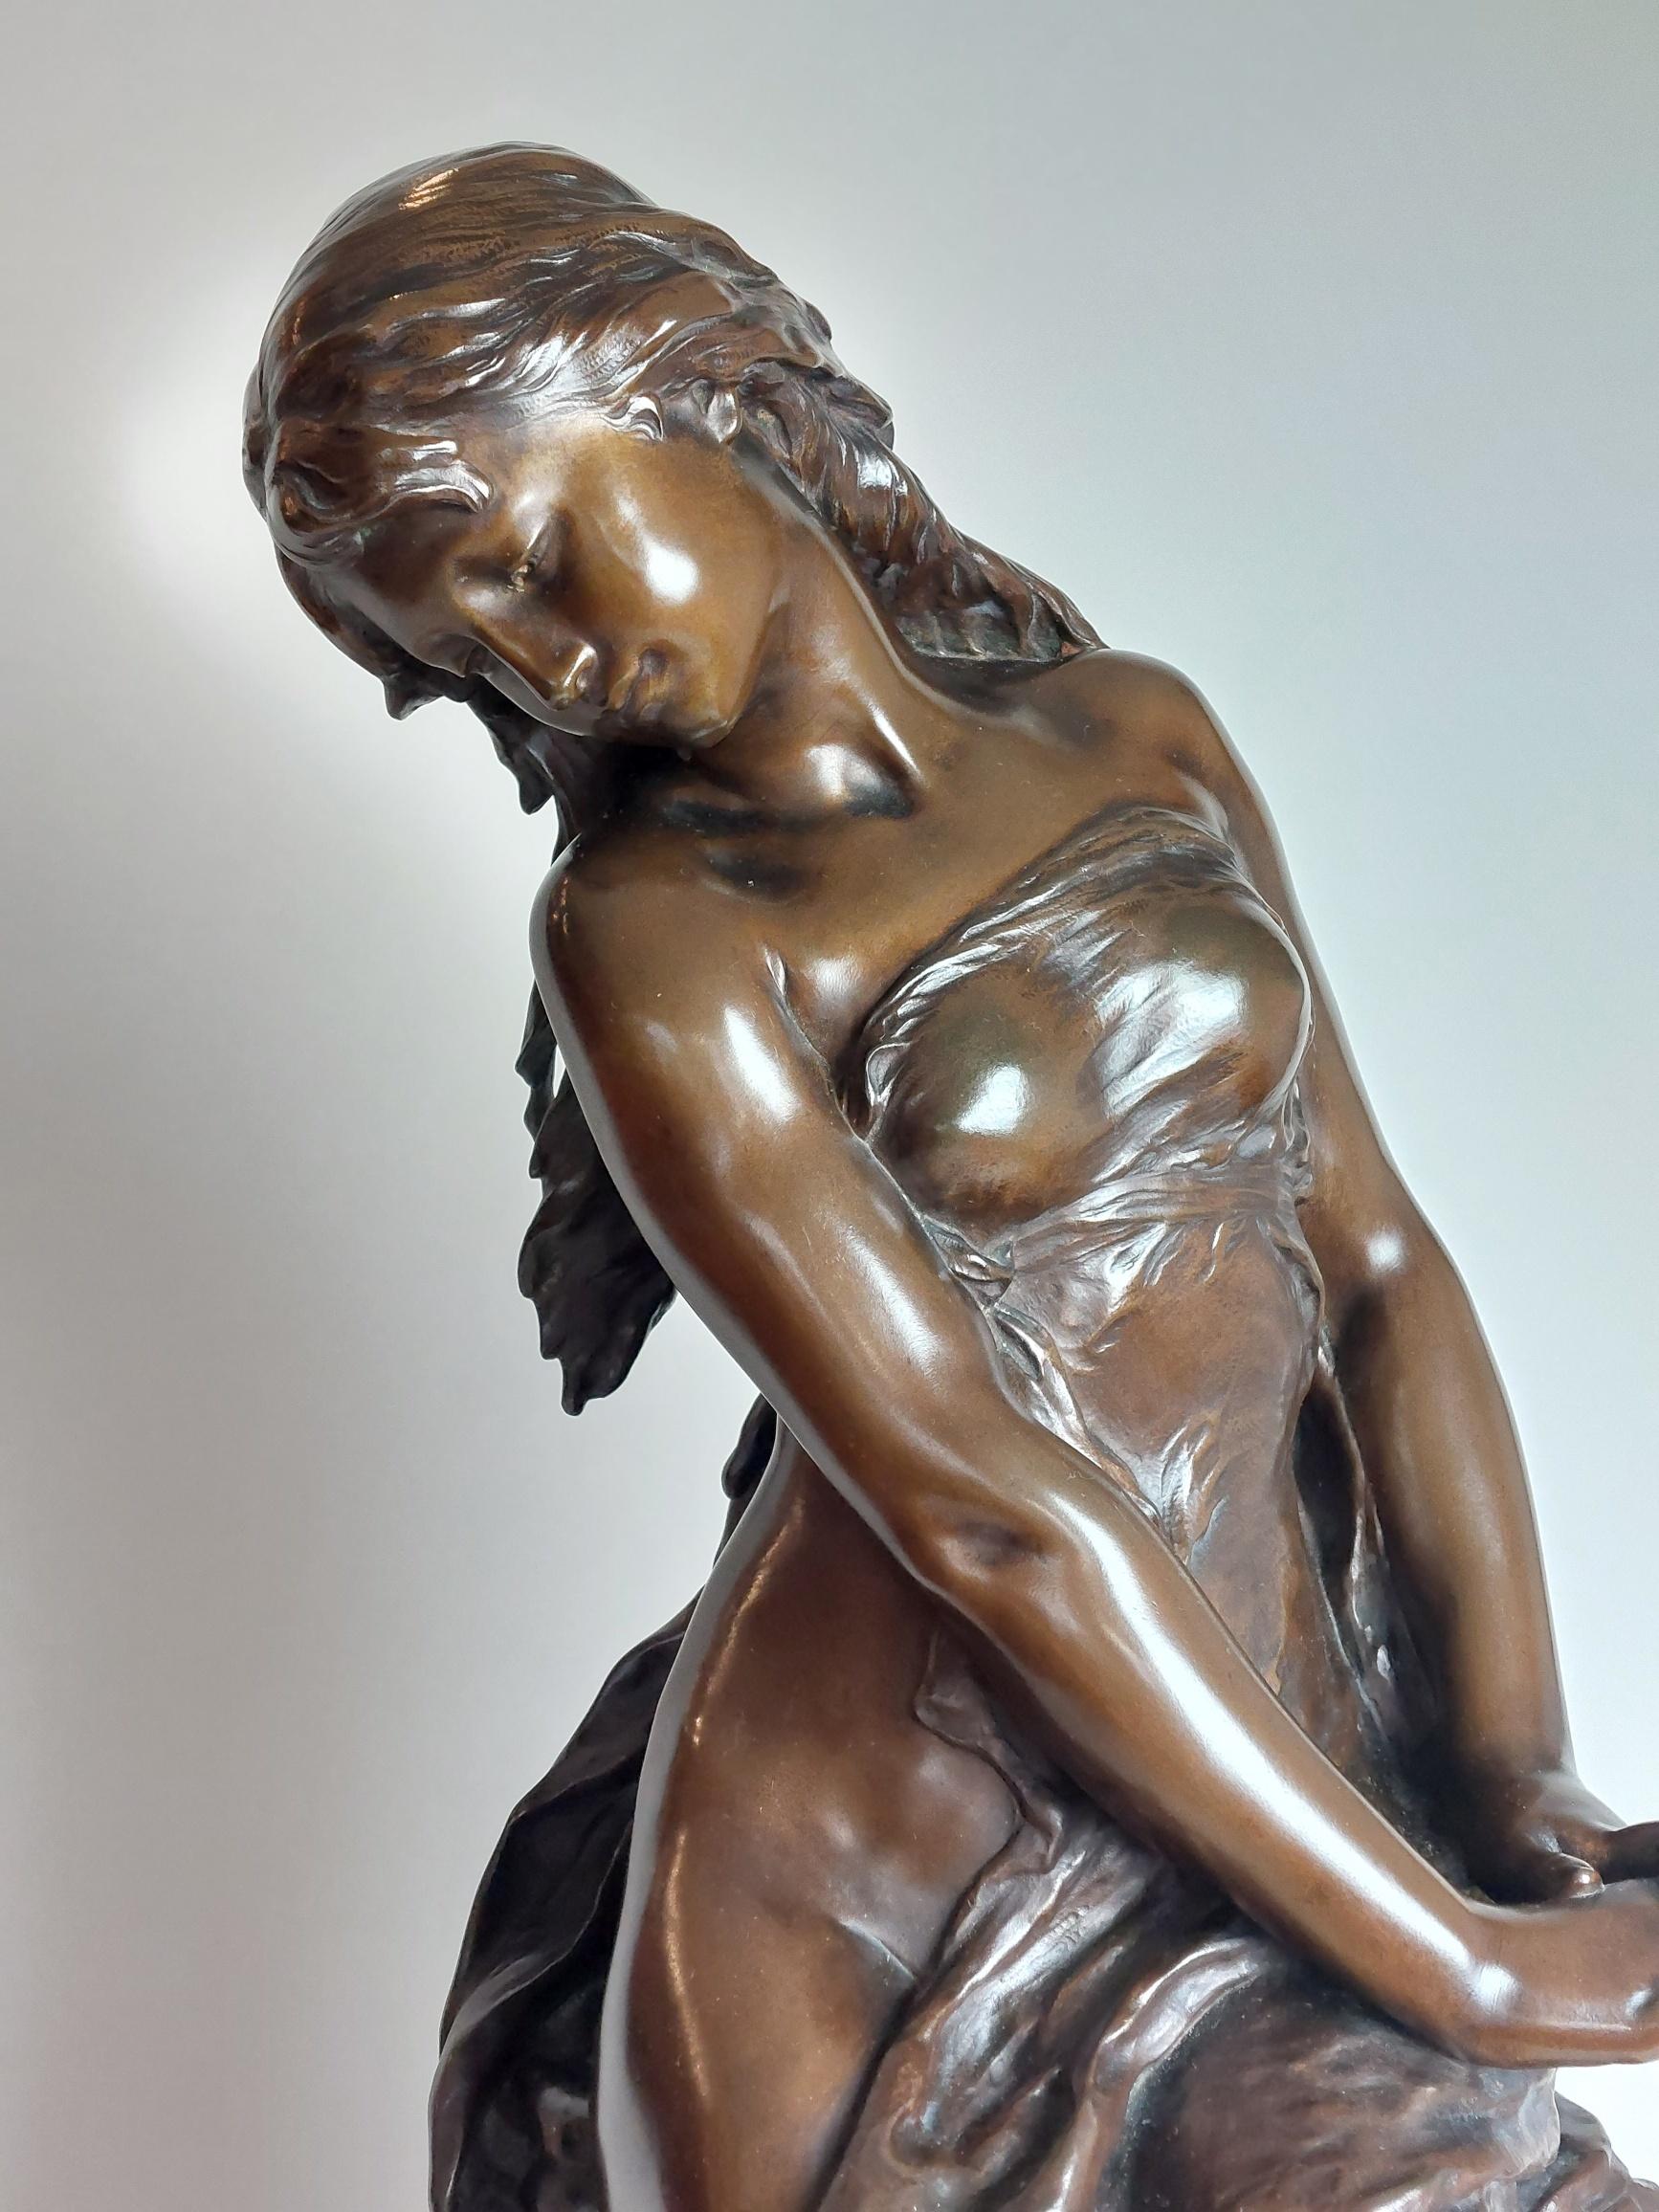 An elegant 19th century French bronze titled ‘Summer’ Signed Math Moreau.

A neoclassical sculpture part of the allegories set of the Four Seasons, she is the joyful embodiment of summer as she looks towards swallows flying past her feet, a